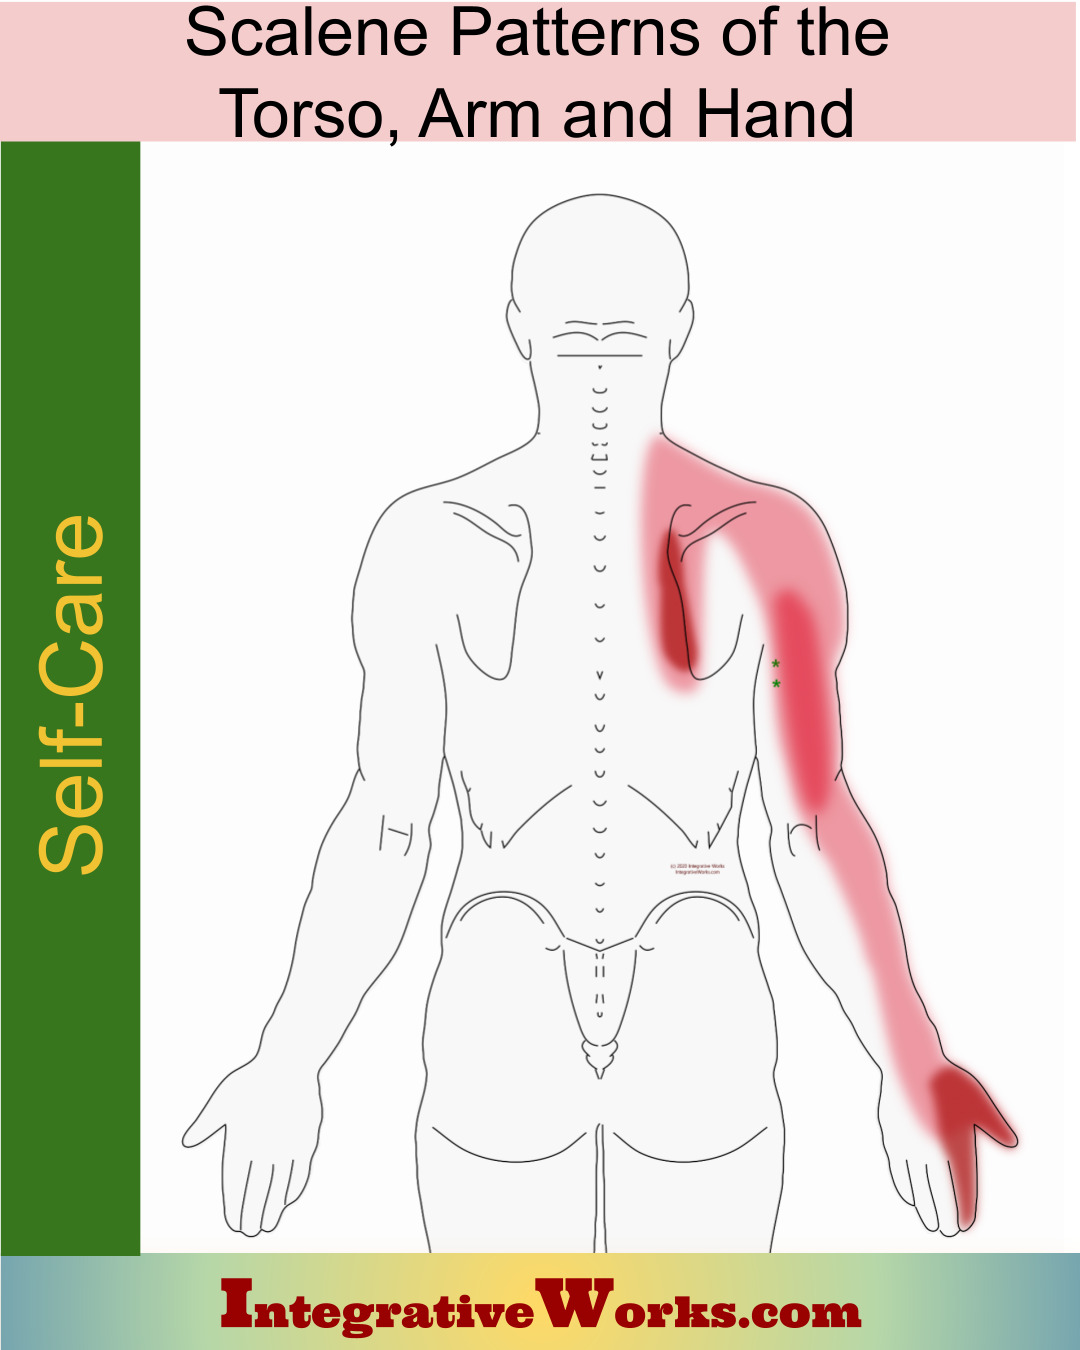 Self Care – Scalene Pain of Upper Back, Arm & Hand